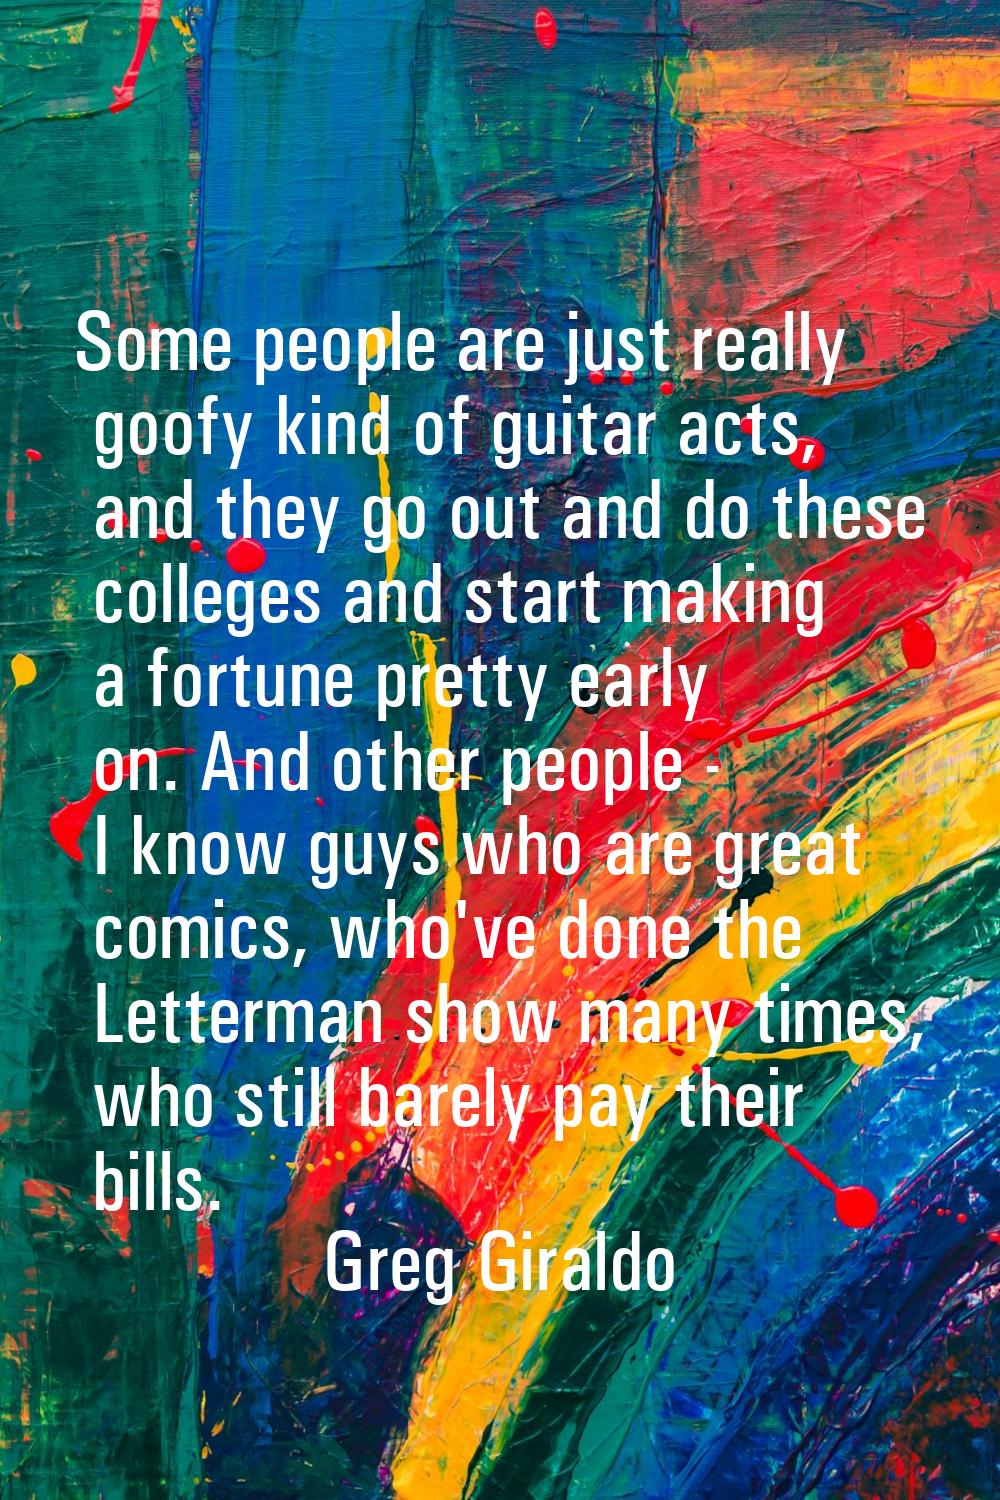 Some people are just really goofy kind of guitar acts, and they go out and do these colleges and st